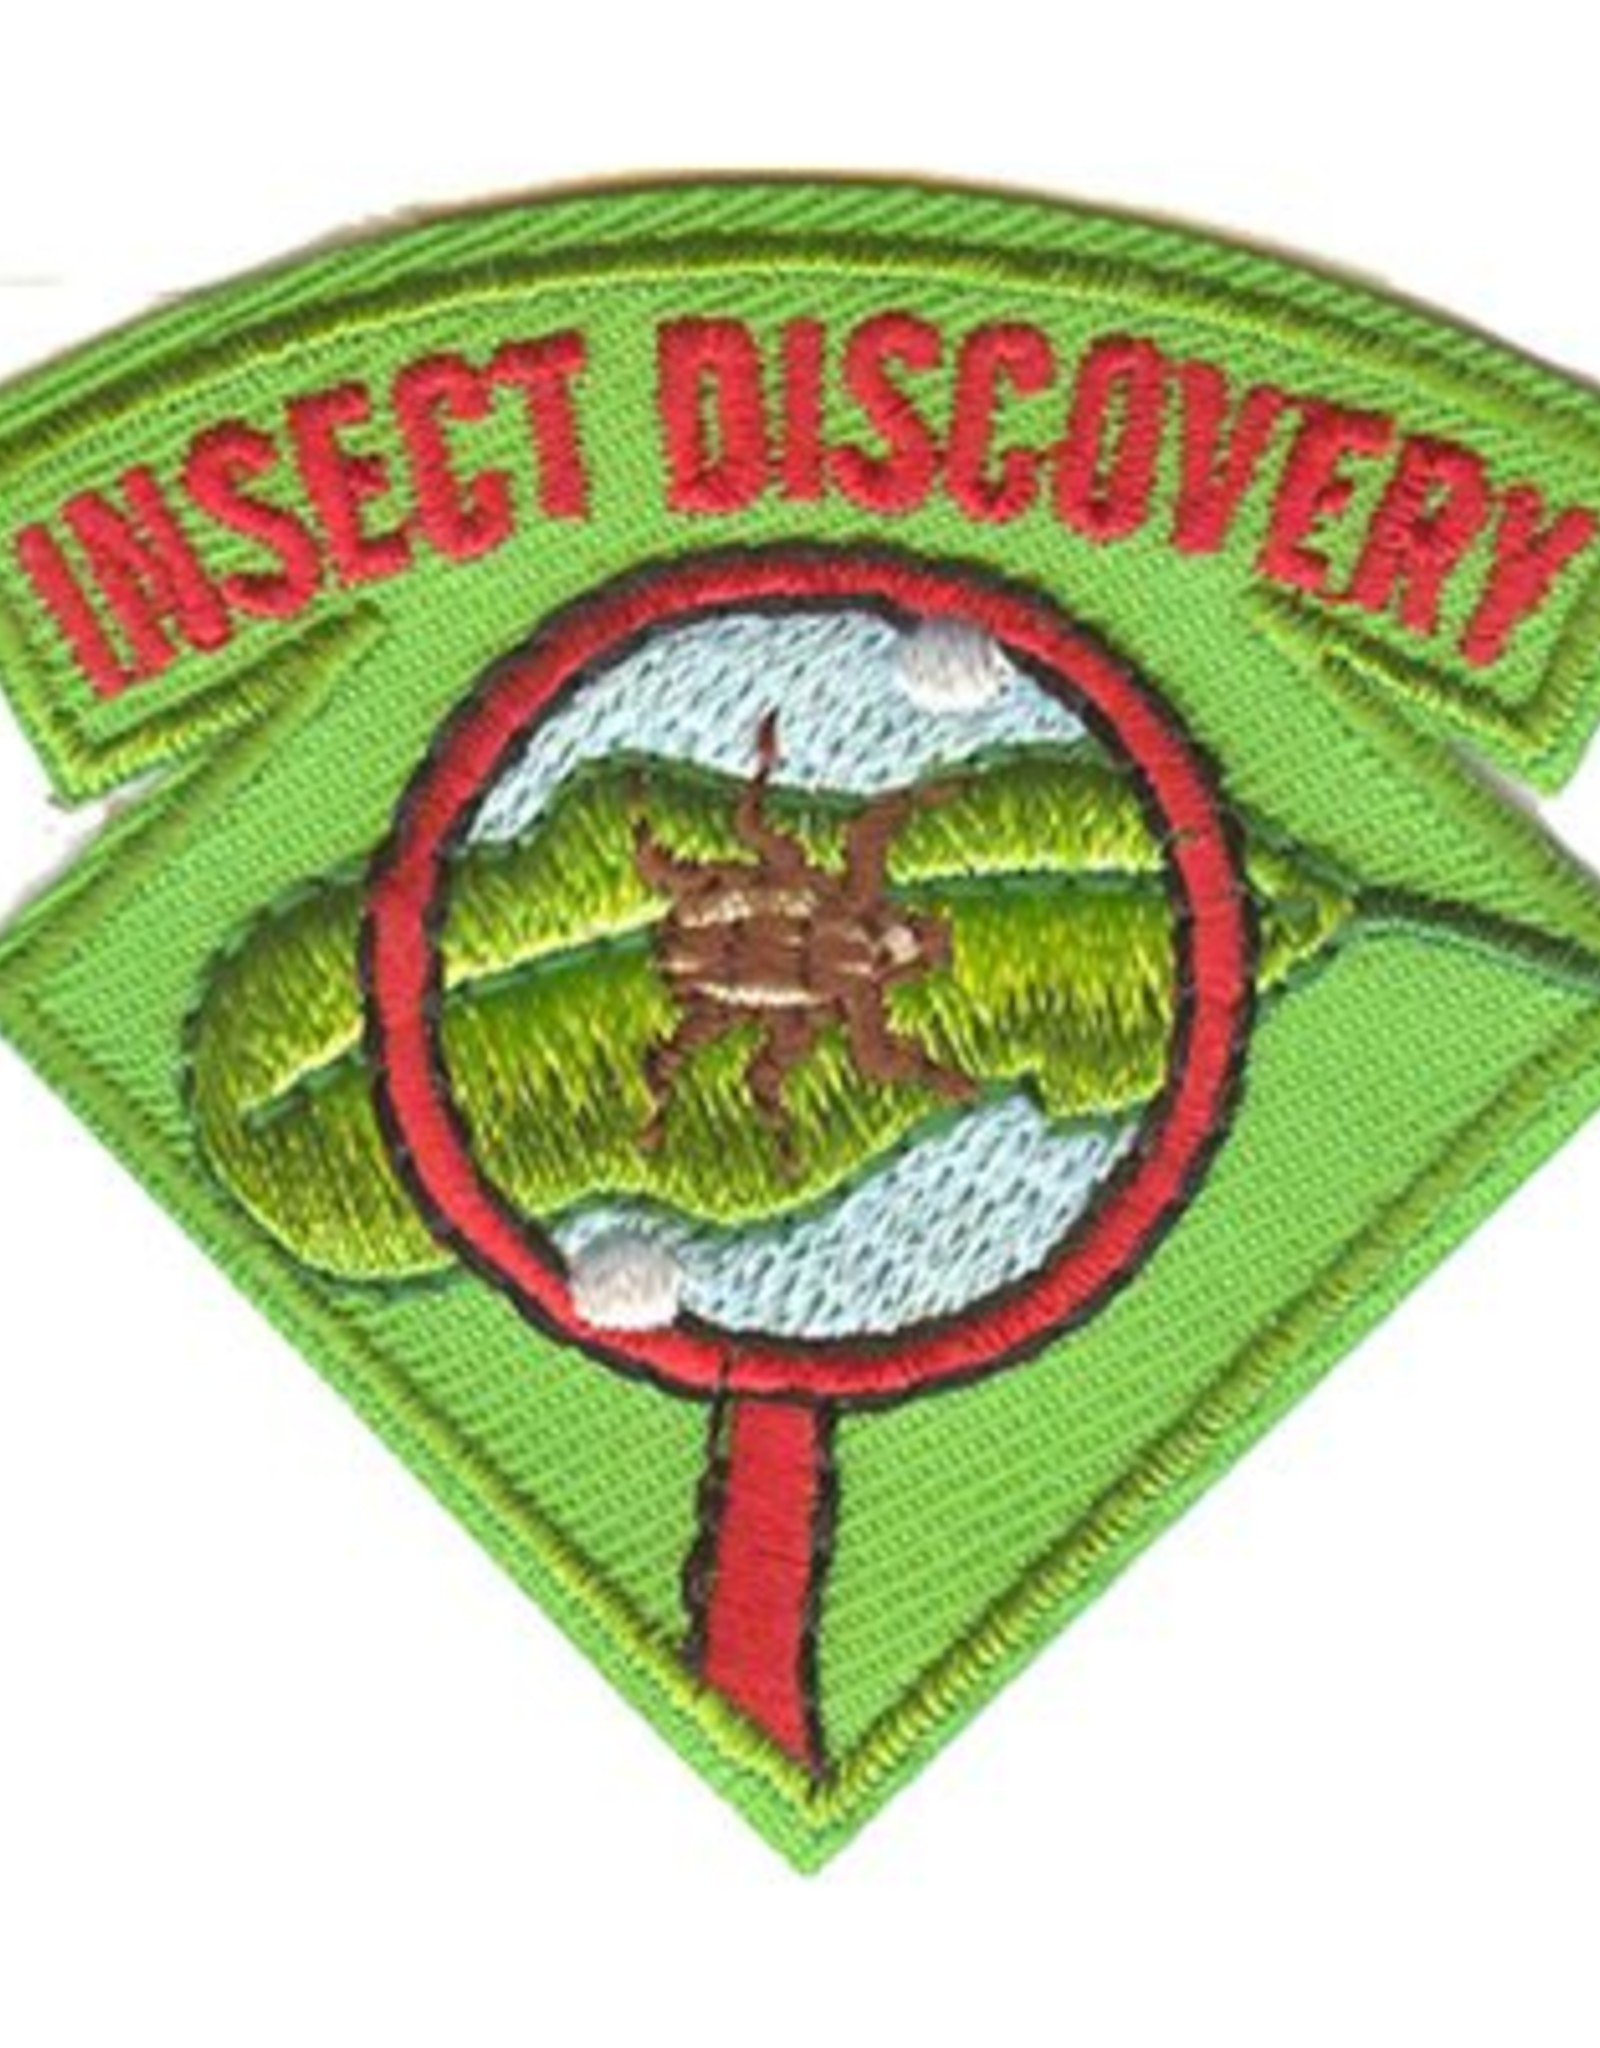 Advantage Emblem & Screen Prnt *Insect Discovery Fun Patch